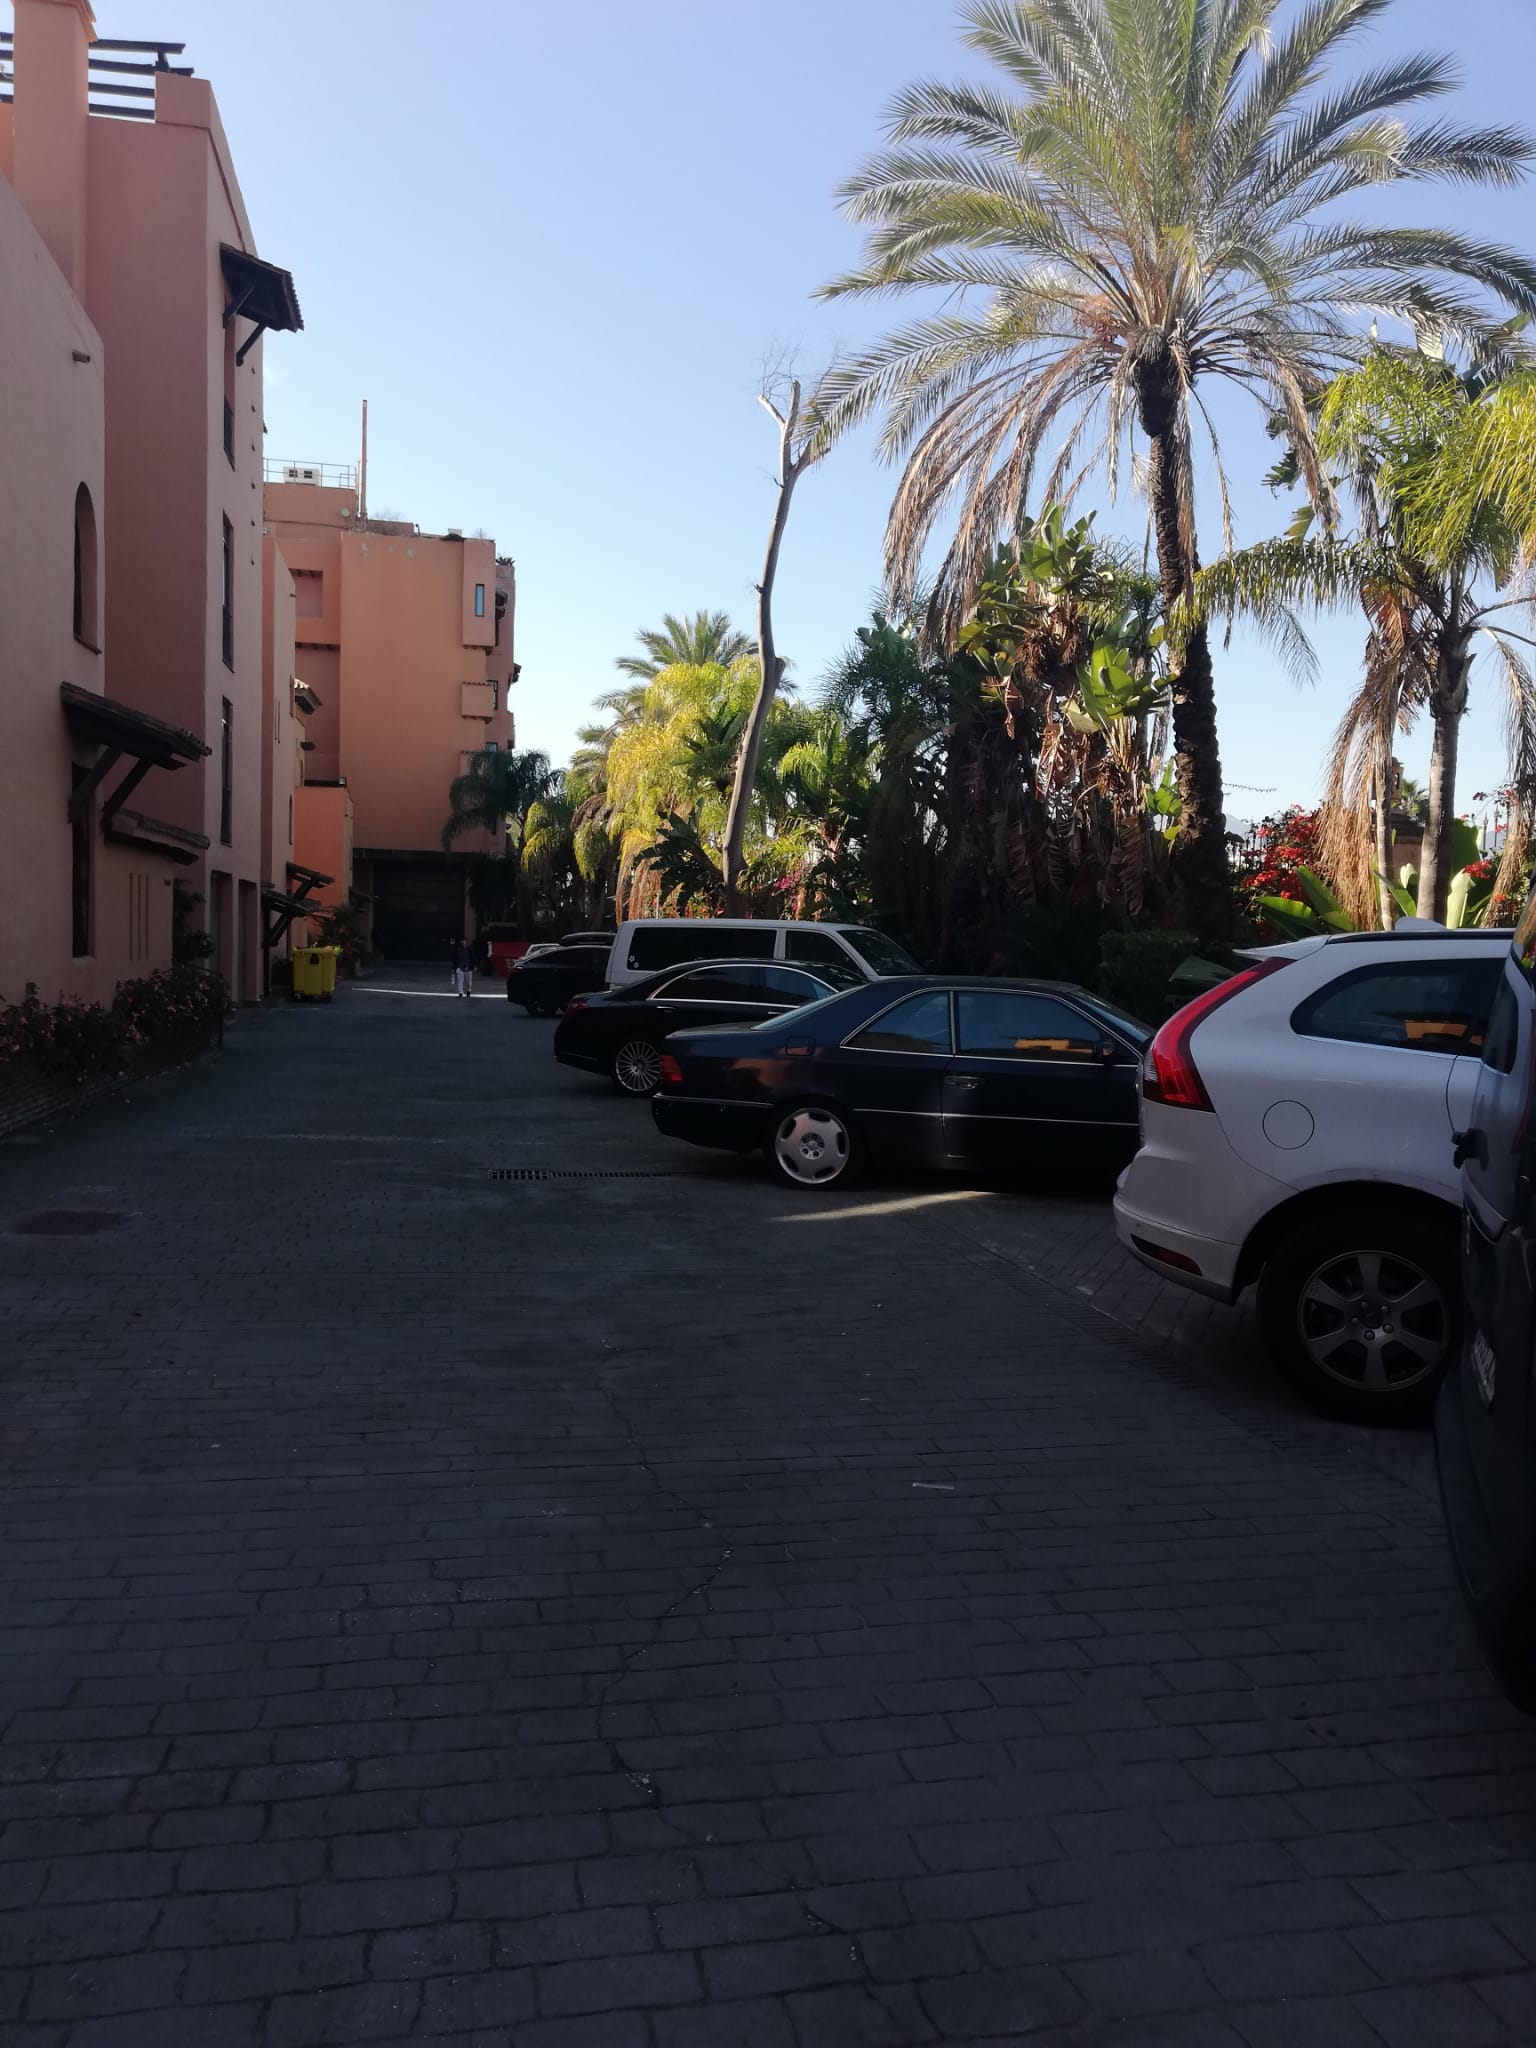 Studio for rent close to the sea and shops in Cancelada - mibgroup.es